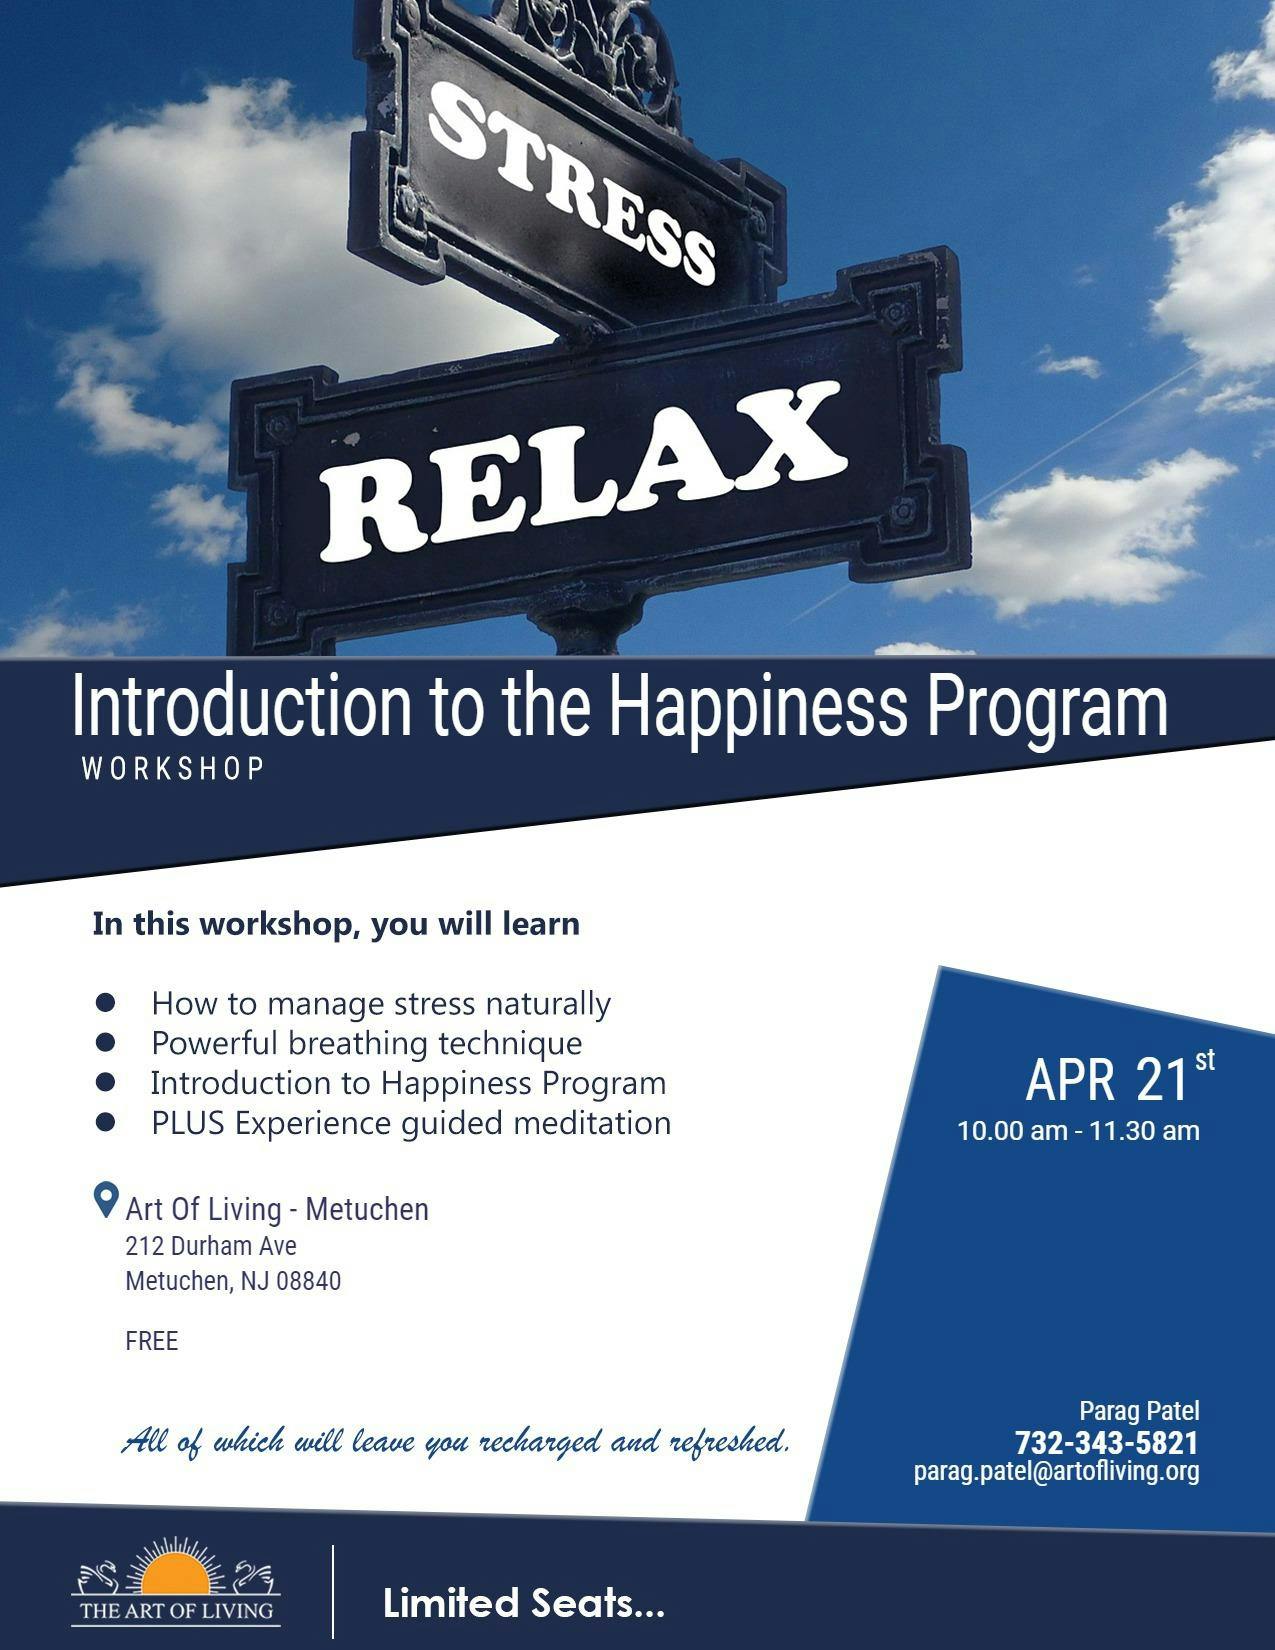 Free Meditation & Introduction to the Happiness Program